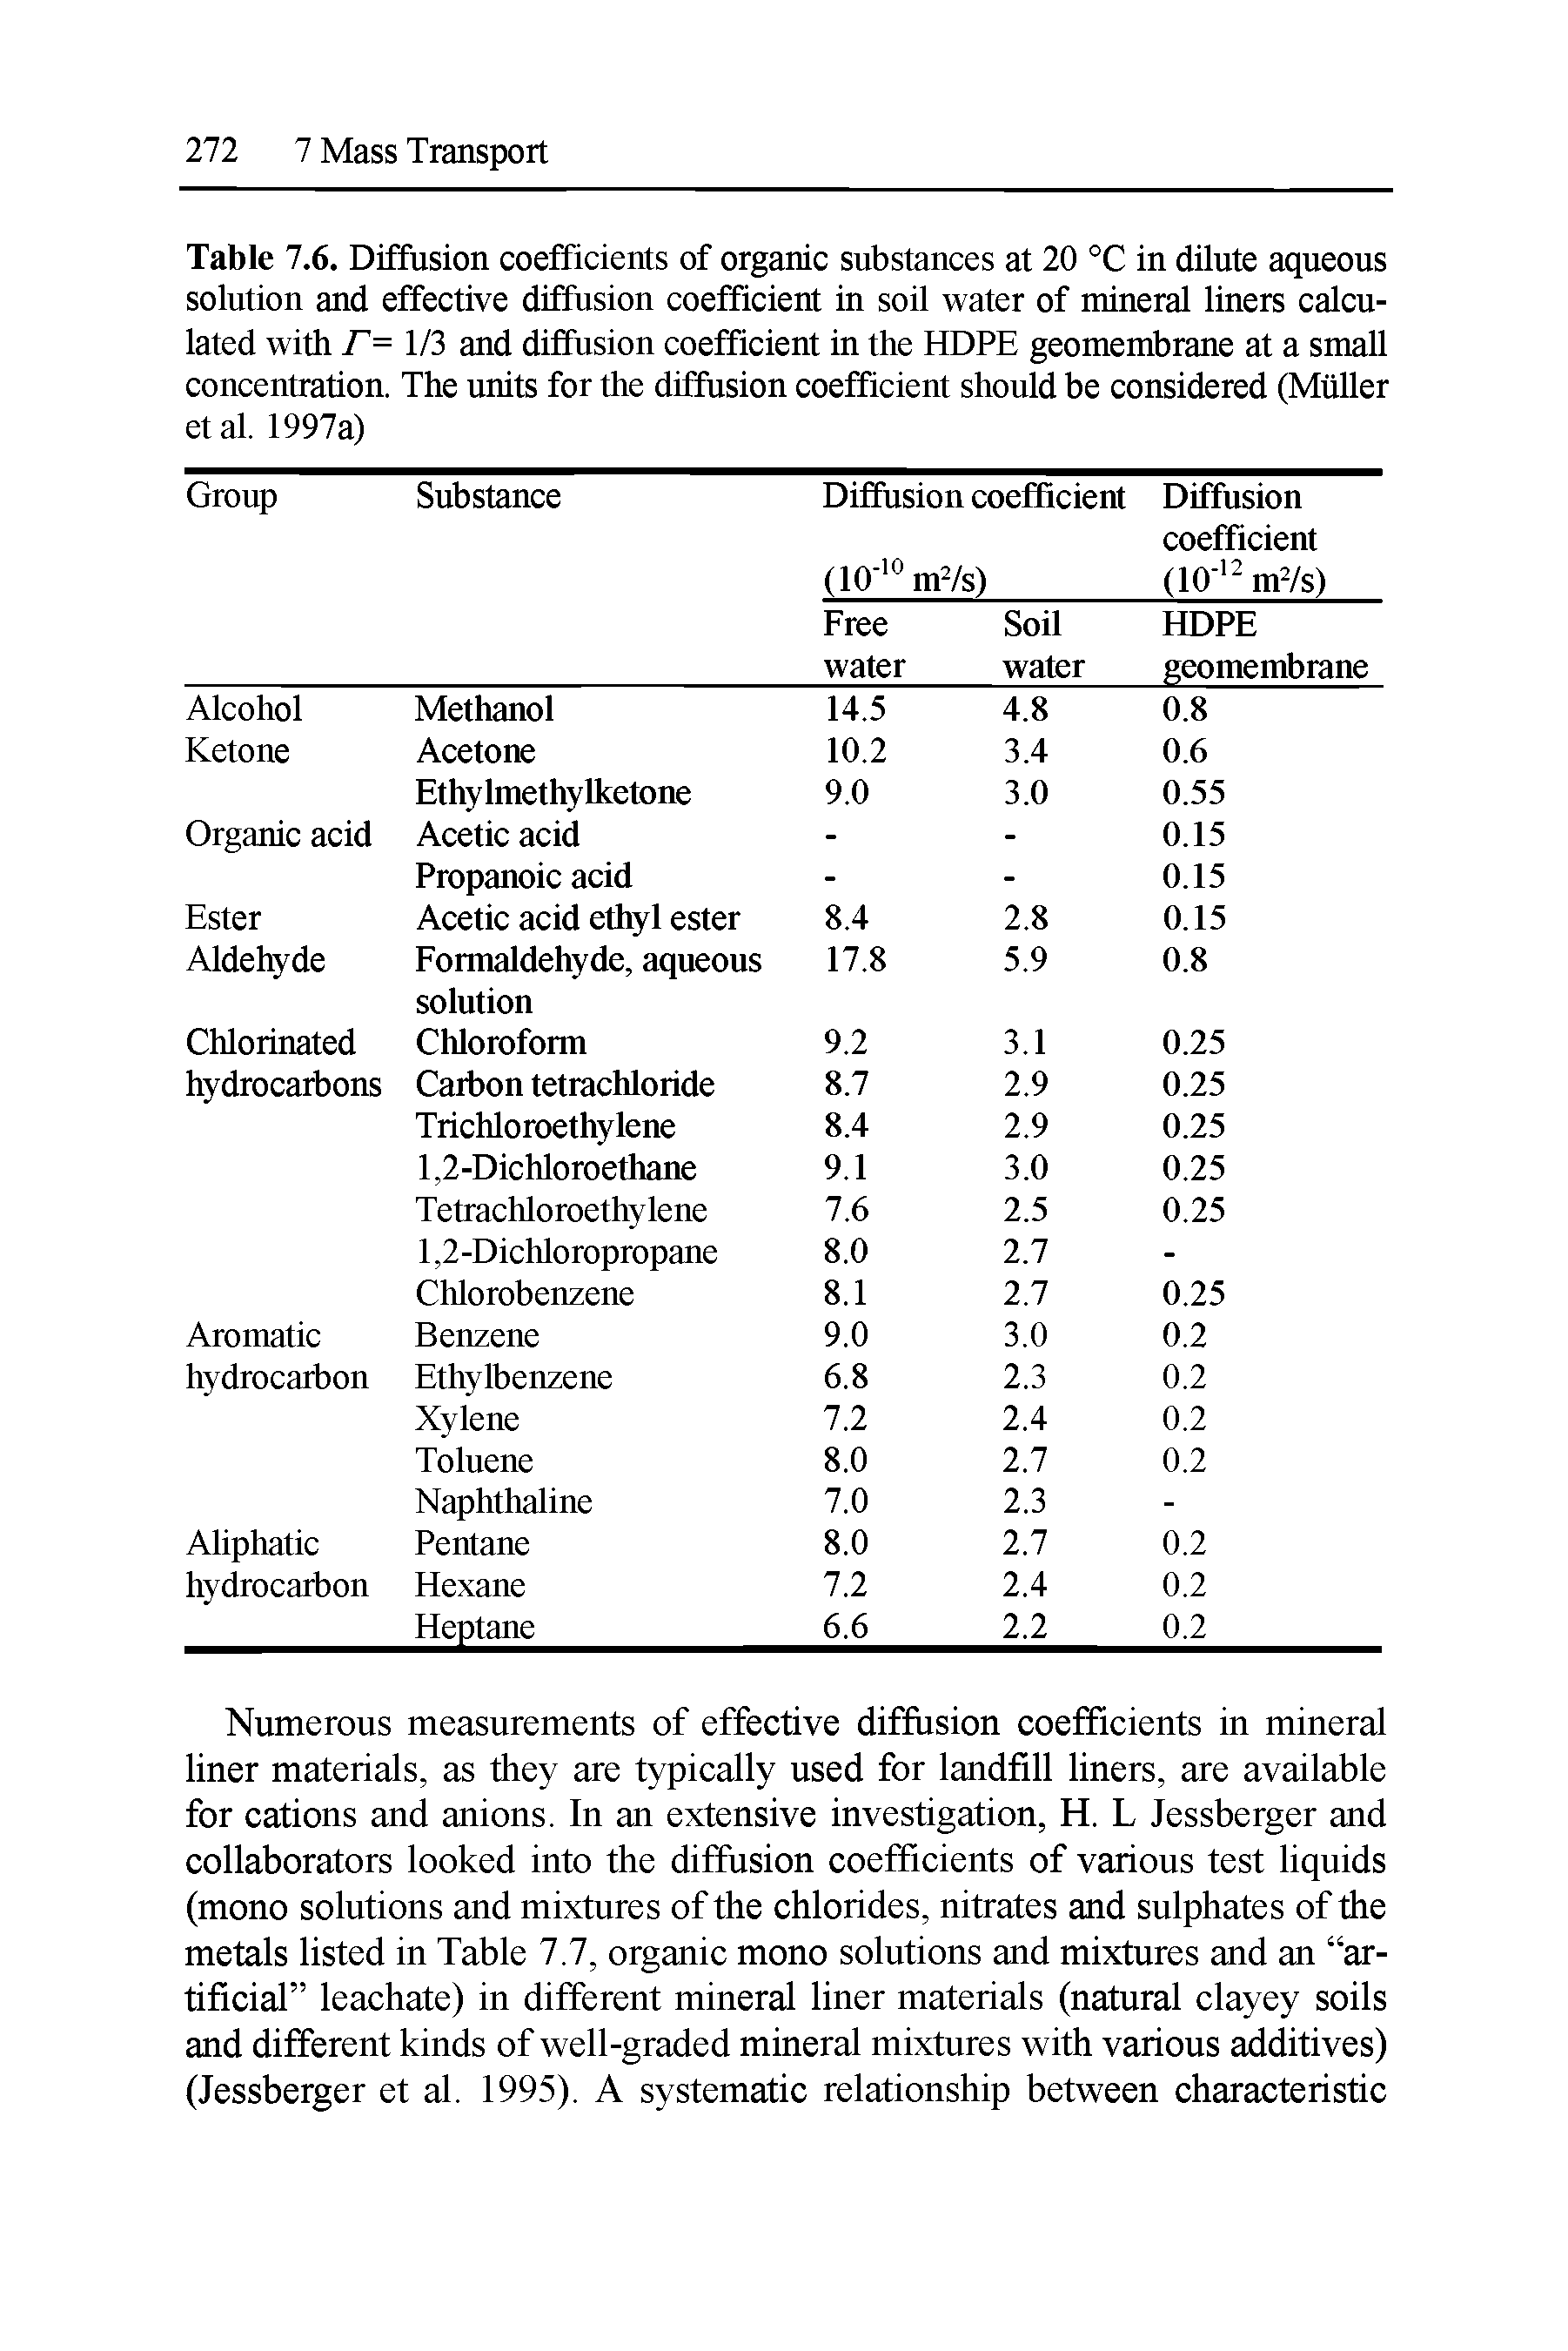 Table 7.6. Diffusion coefficients of organic substances at 20 °C in dilute aqueous solution and effective diffusion coefficient in soil water of mineral liners calculated with r= 1/3 and diffusion coefficient in the HOPE geomembrane at a small concentration. The units for the diffusion coefficient should be considered (Muller etal. 1997a)...